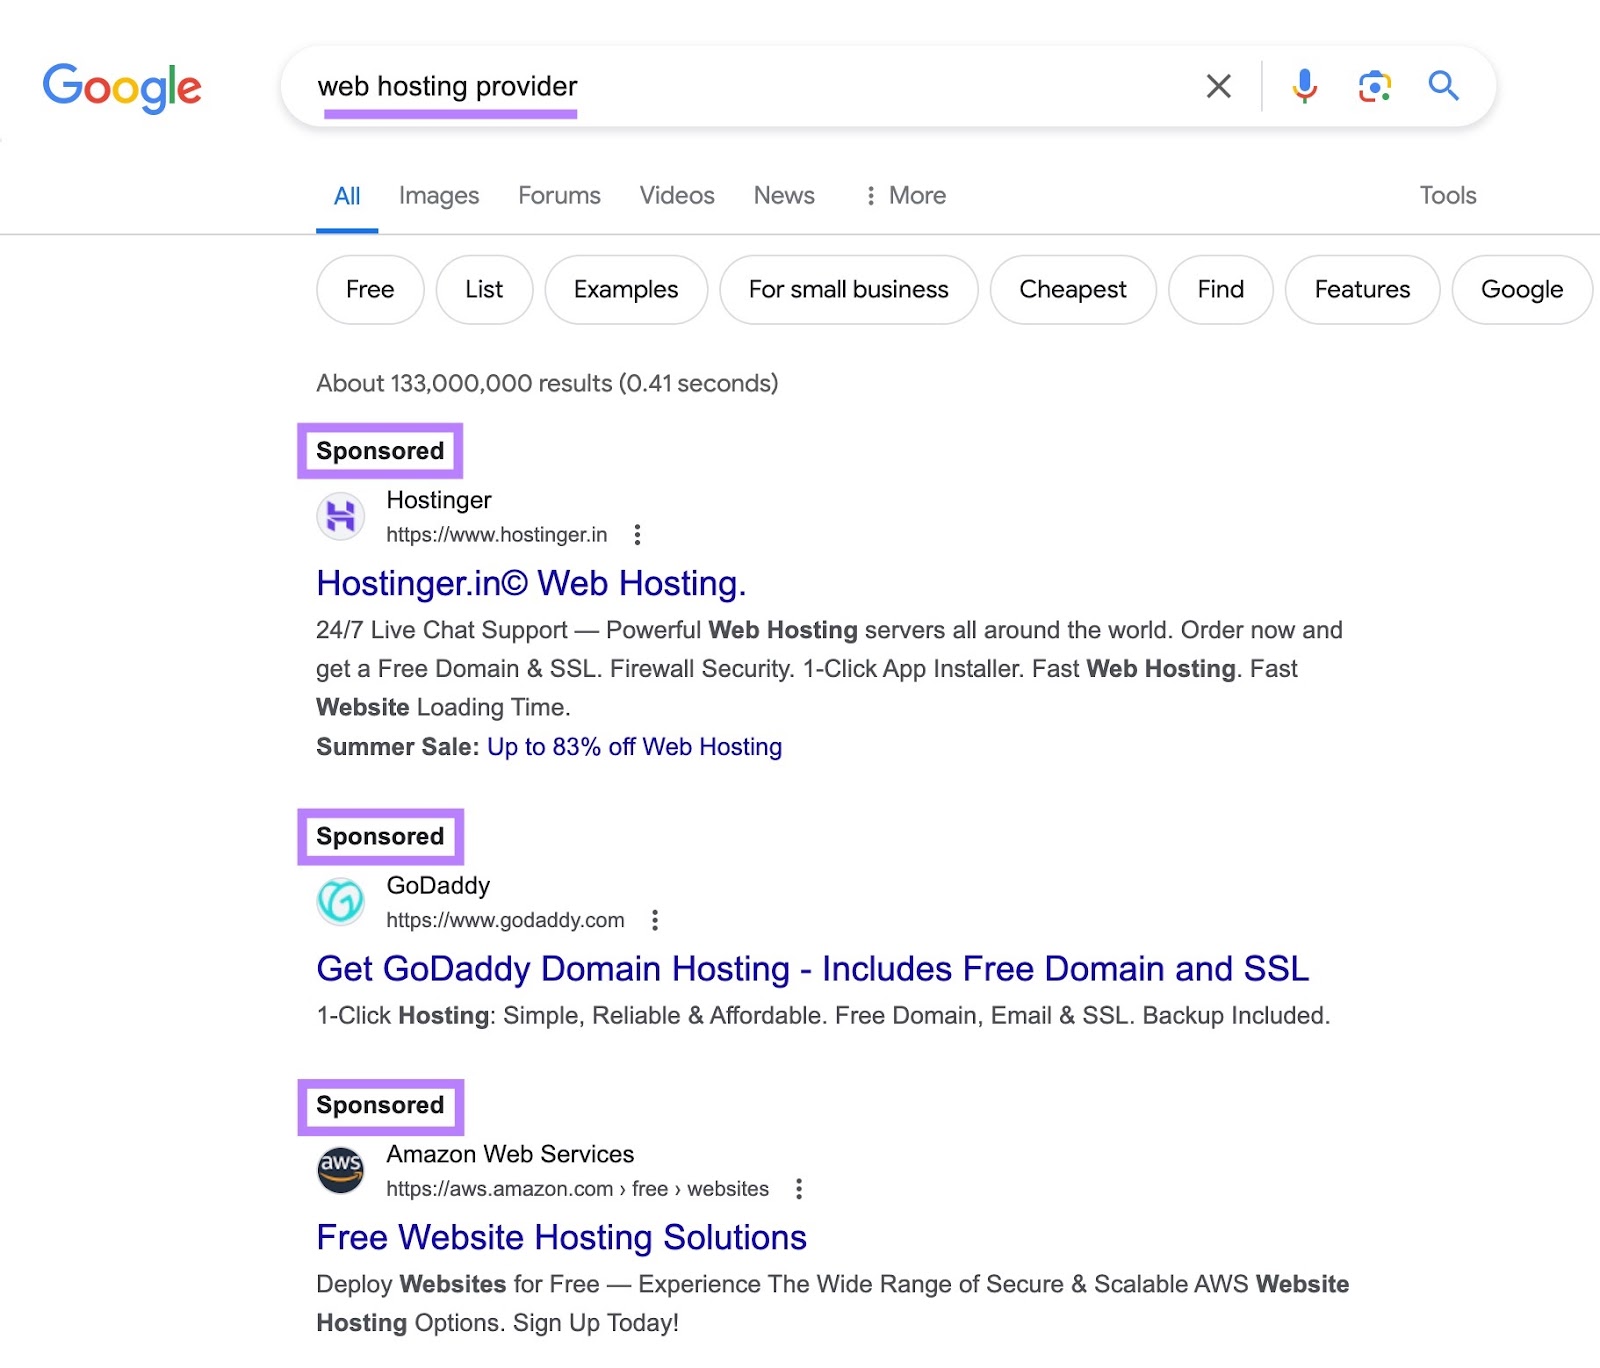 “Sponsored" results on Google serp for "web hosting provider" query